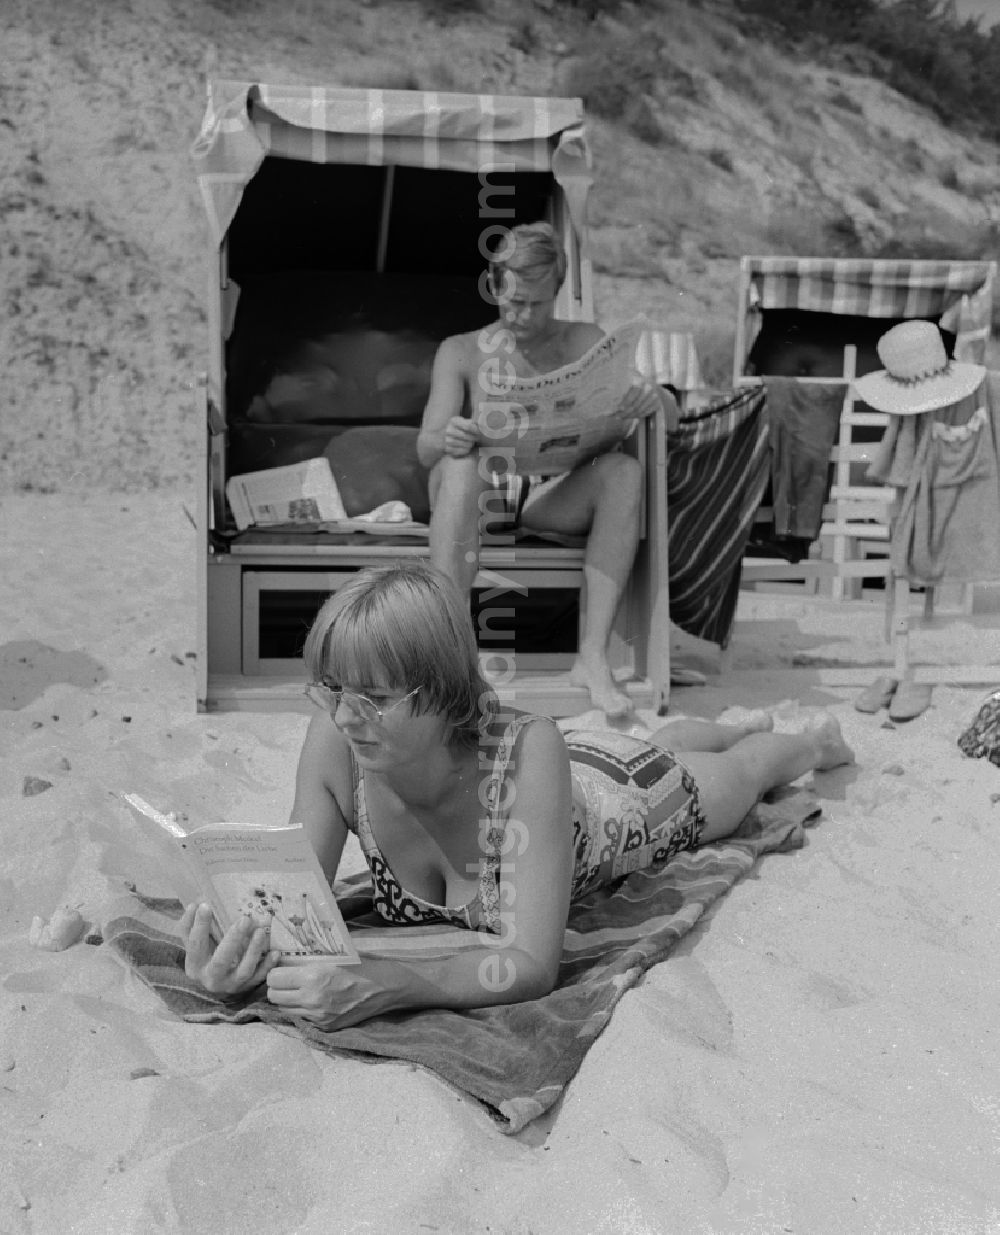 GDR picture archive: Ückeritz - Tourists on the beach in Ueckeritz in Mecklenburg-Western Pomerania in the field of the former GDR, German Democratic Republic. A man sitting in a beach chair and reading a newspaper. A woman with glasses lying on a towel reading a book